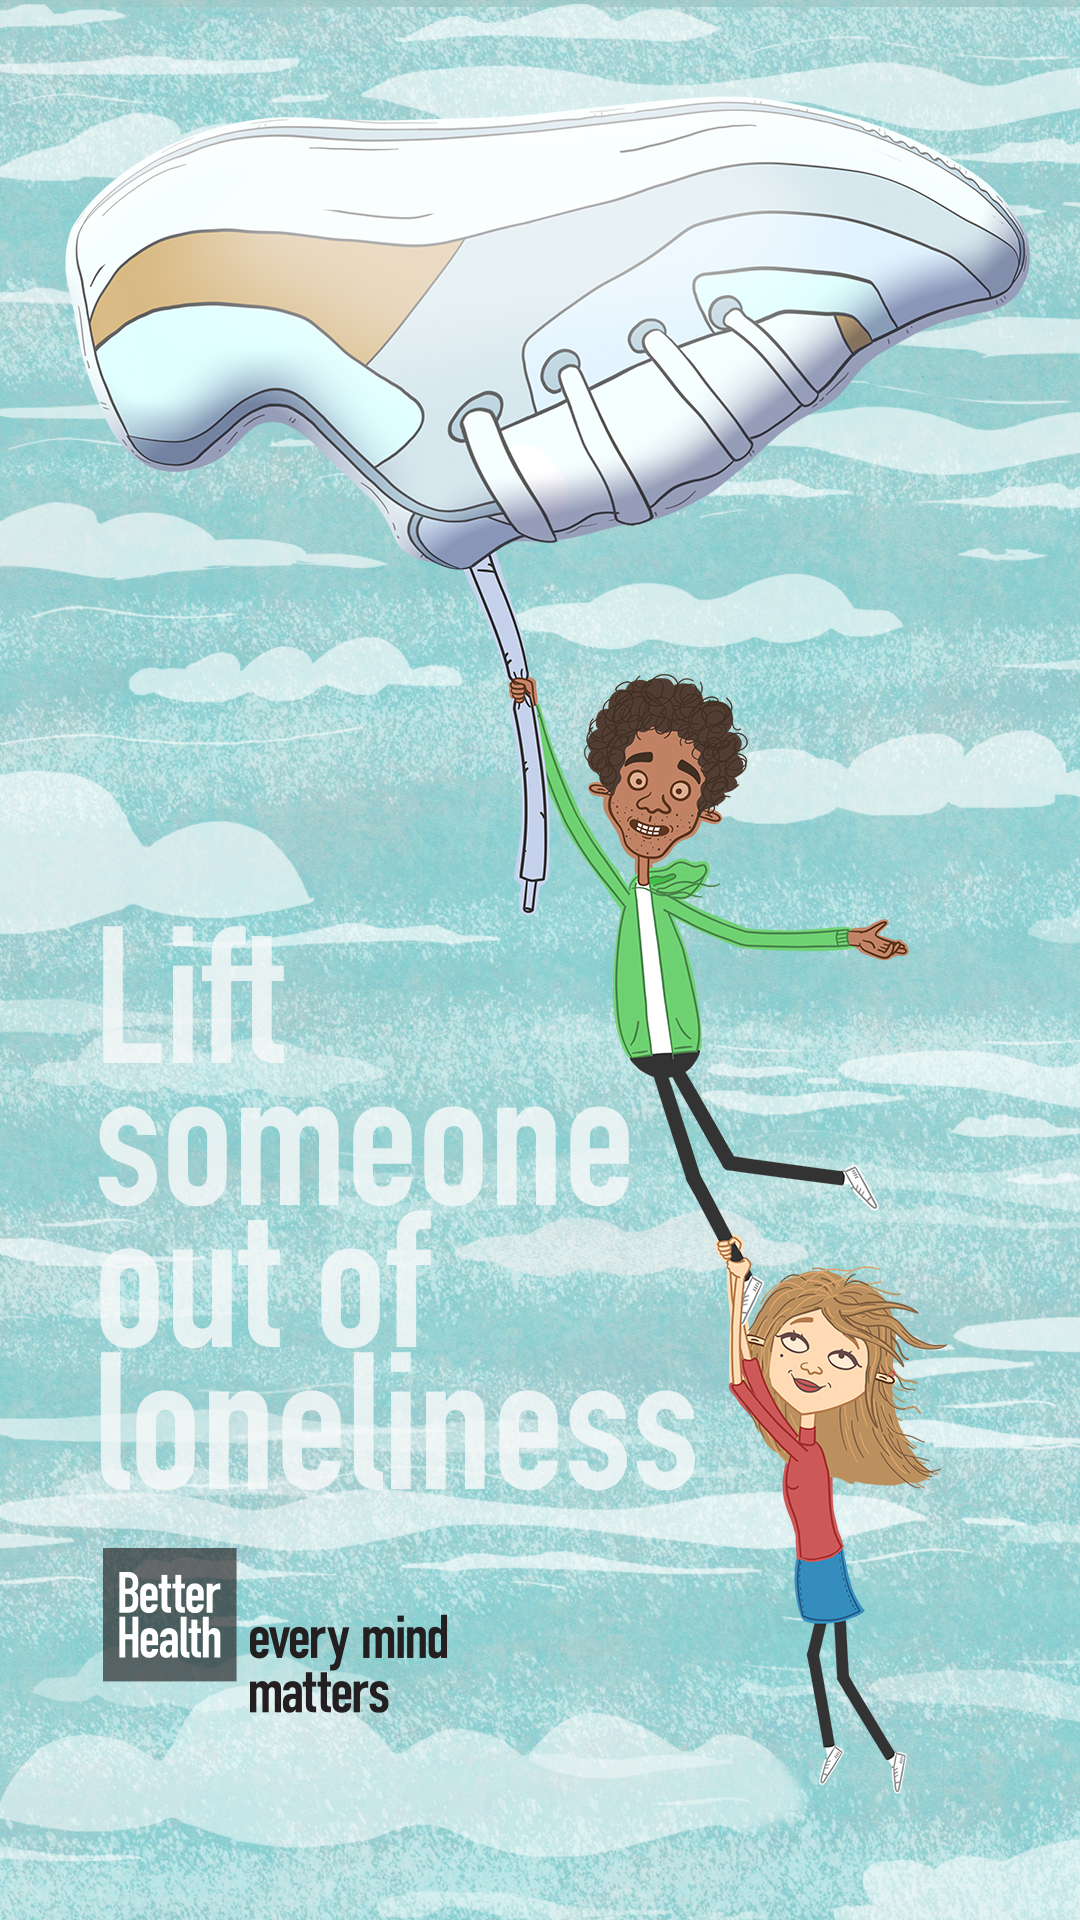 lift someone out of loneliness with link to NHS Every Mind Matters website